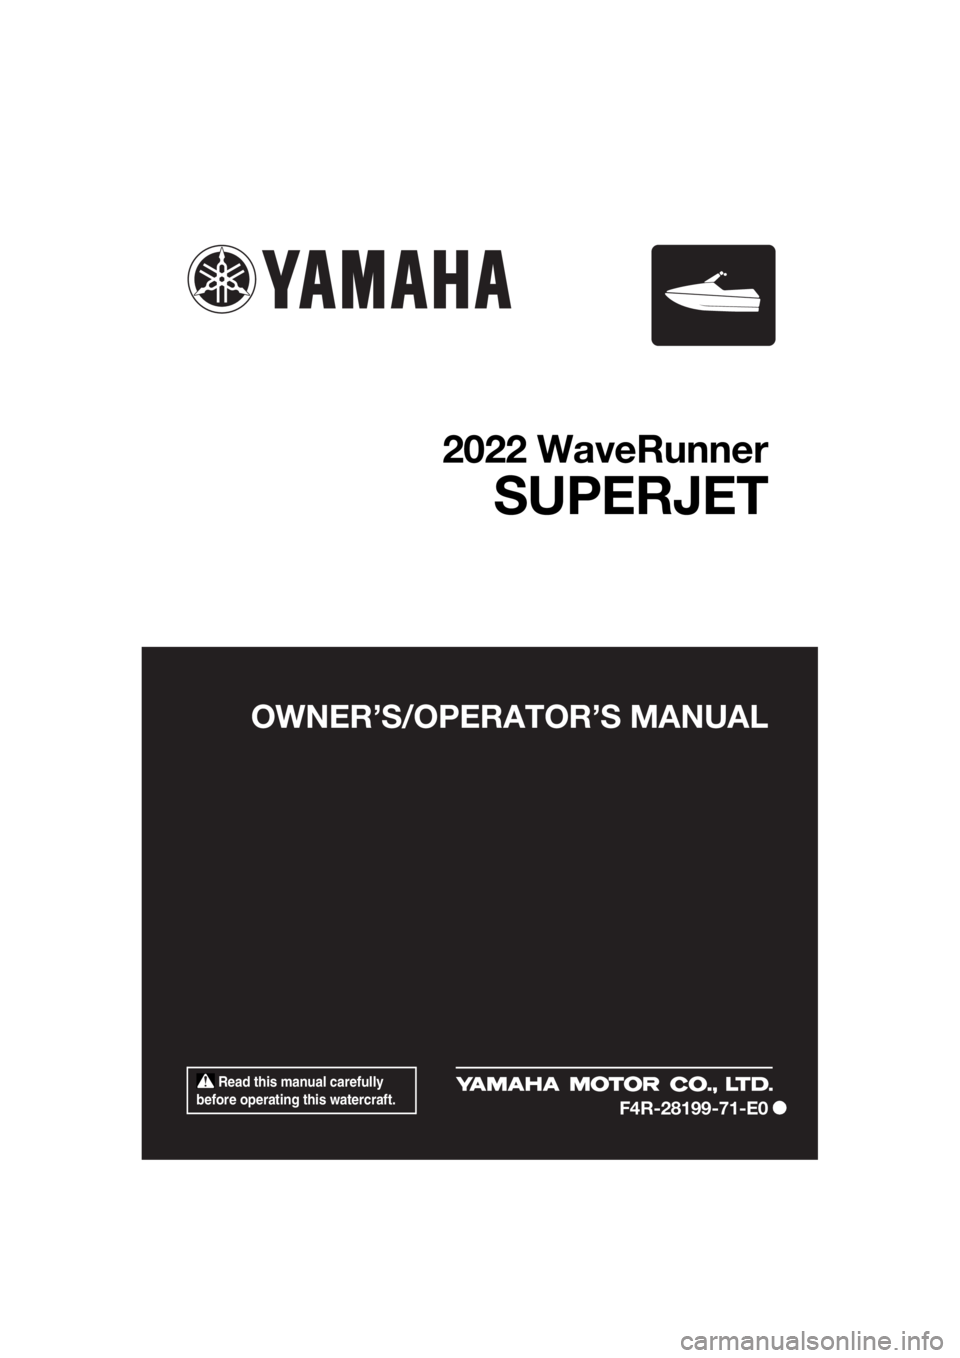 YAMAHA SUPERJET 2022  Owners Manual  Read this manual carefully 
before operating this watercraft.
OWNER’S/OPERAT OR’S MANUAL
2022 WaveRunner
SUPERJET
F4R-28199-71-E0
cover1-1  Page 1  Friday, May 21, 2021  9:54 AM 